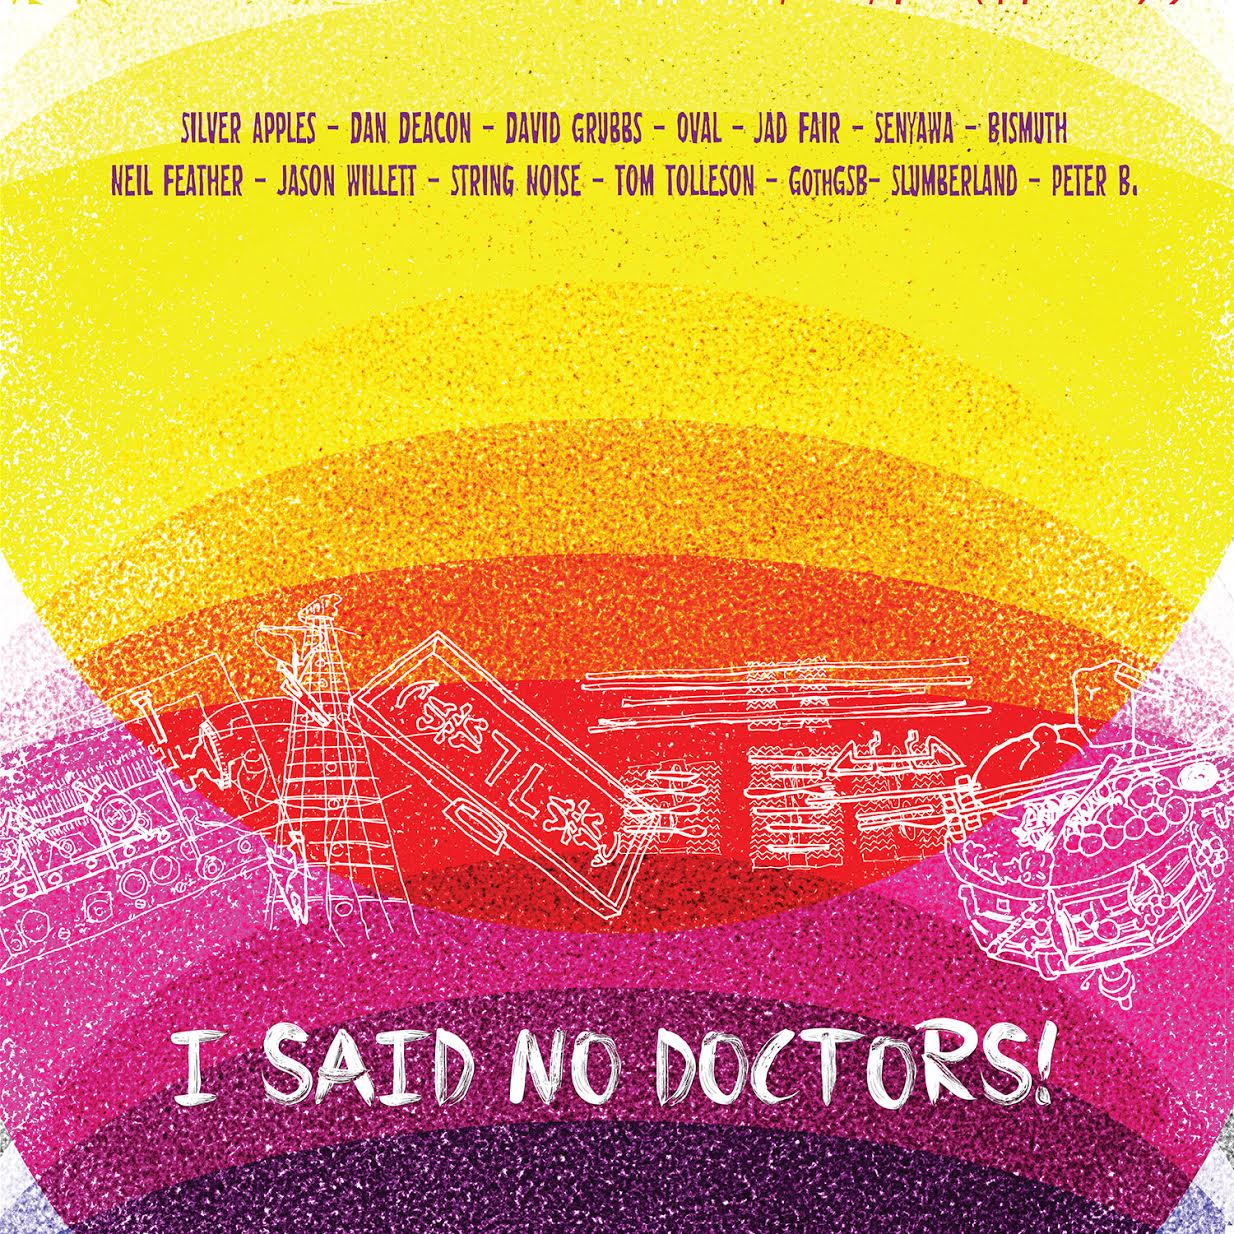 Oval debut title-track from 'I Said No Doctors'. The compilation features Dan Deacon, Silver Apples, David Grubs